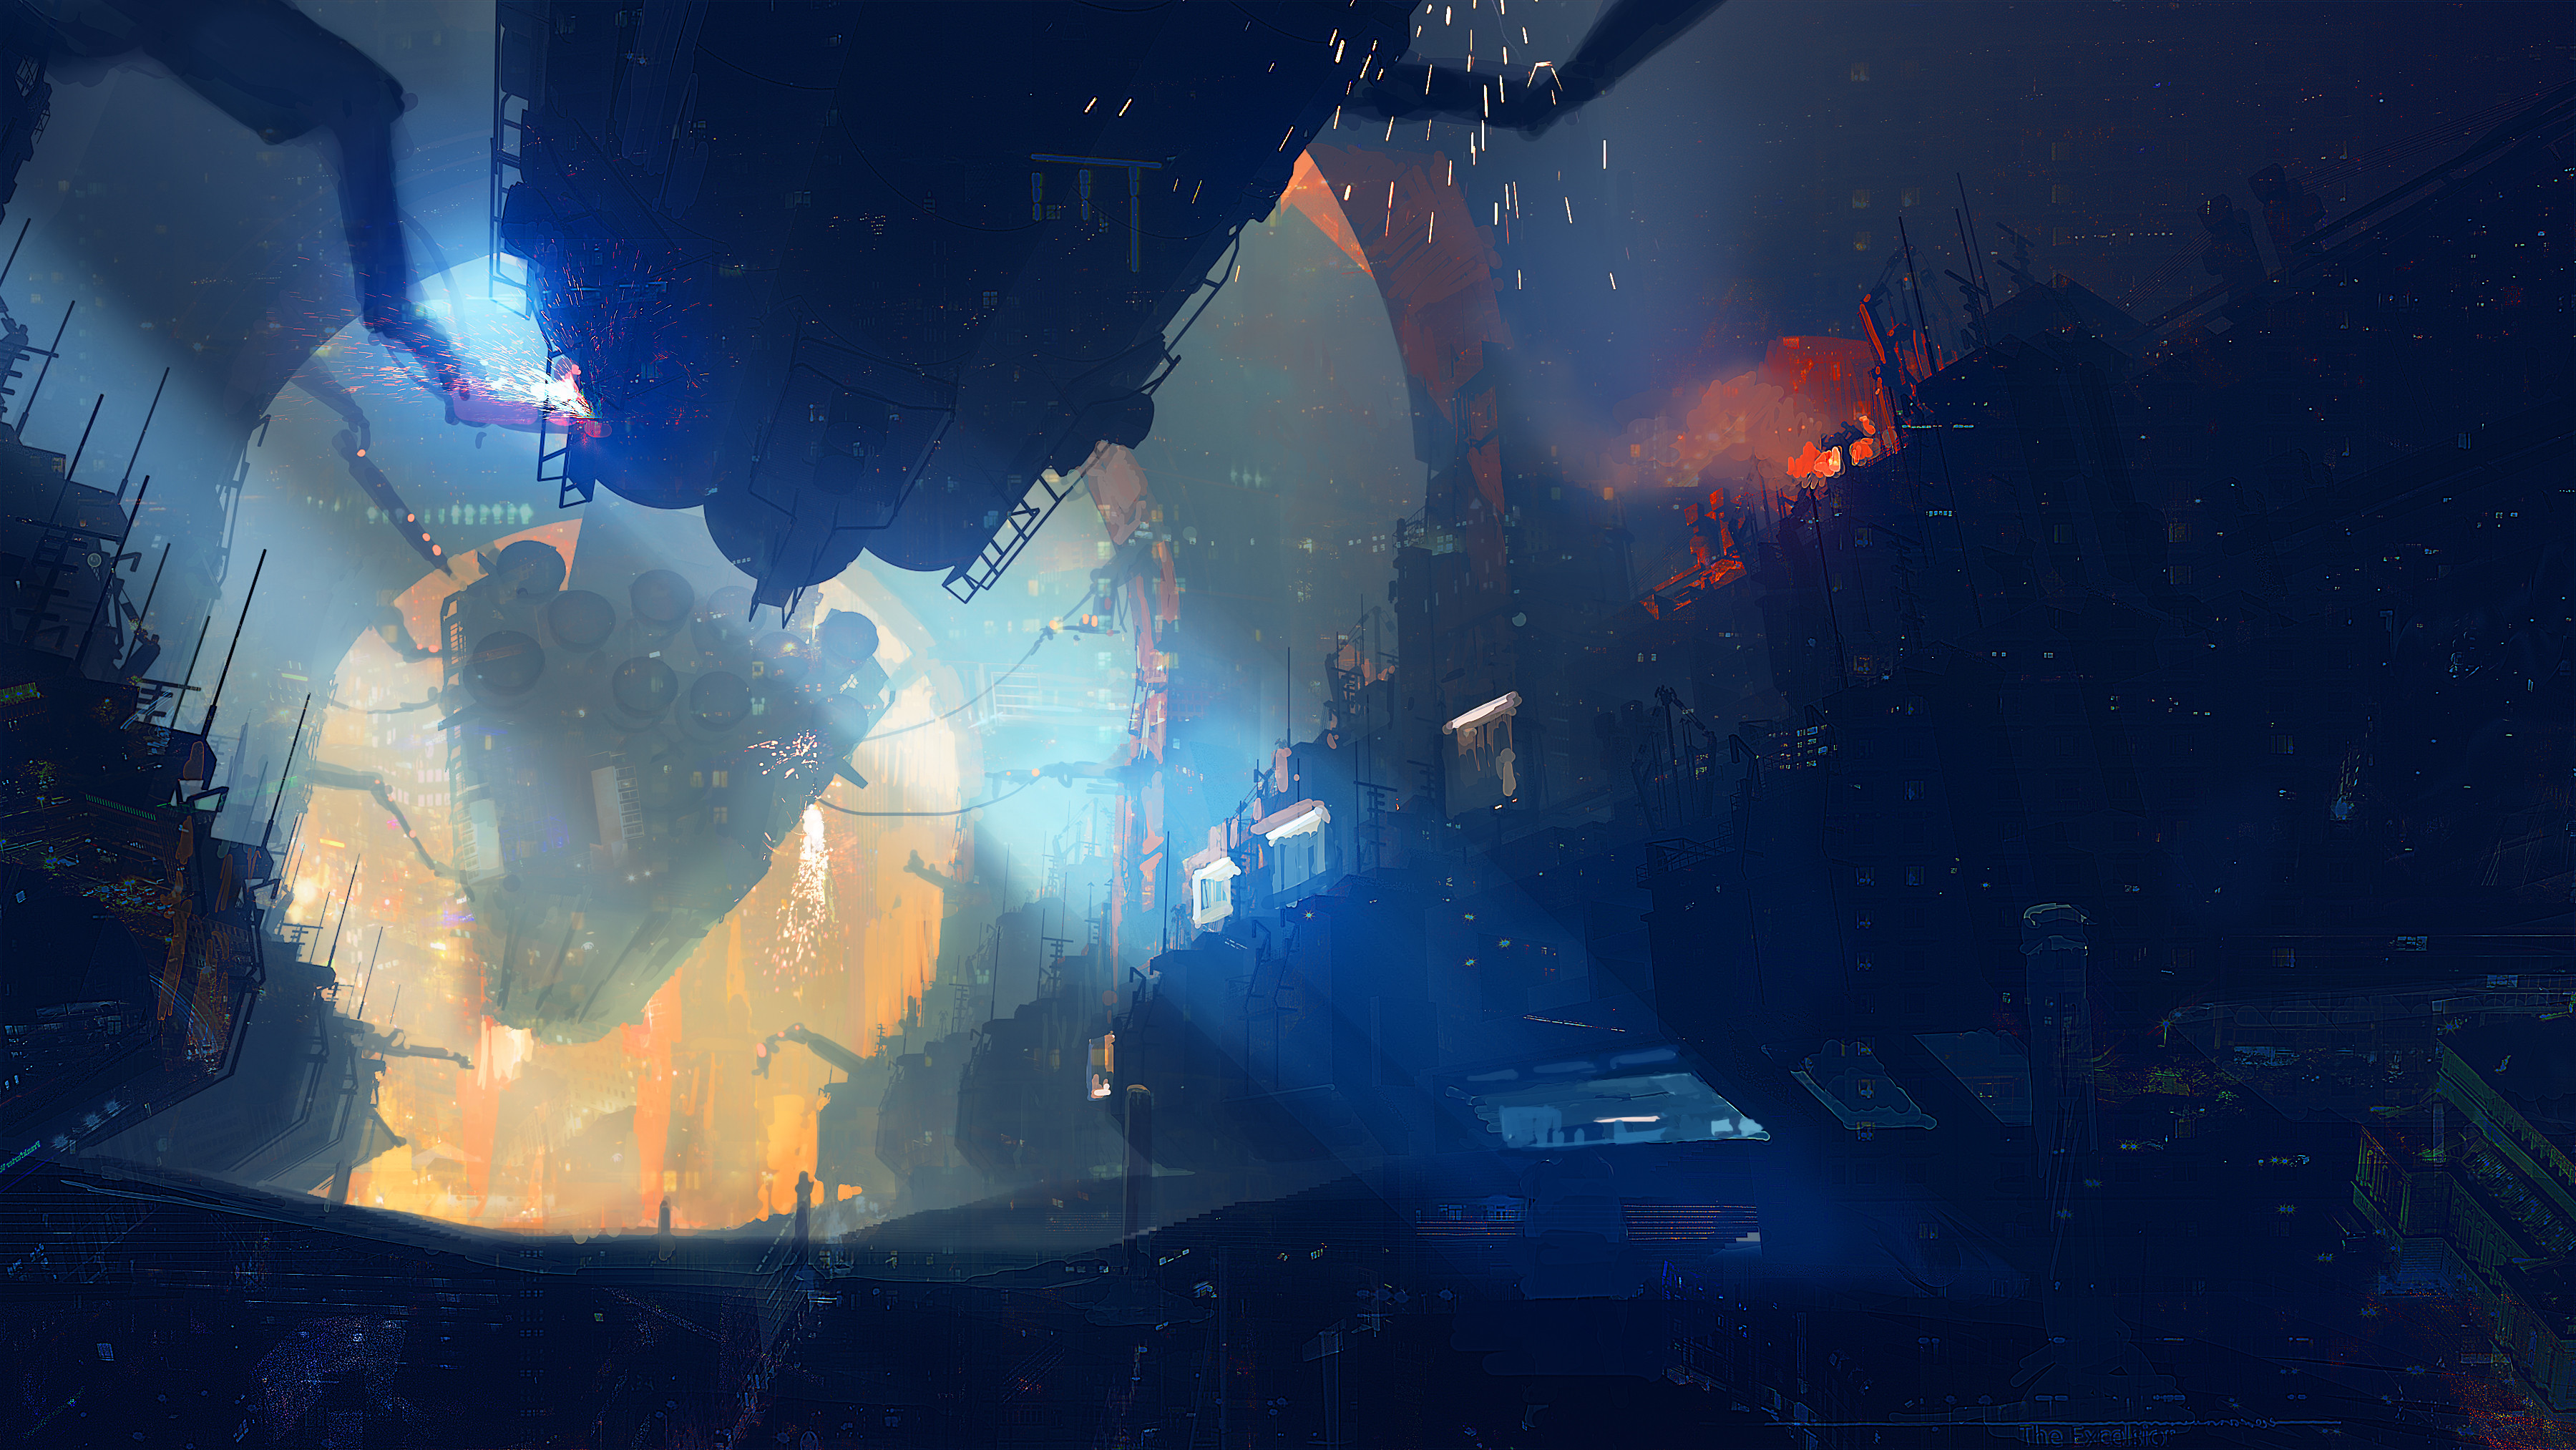 Artwork of a sci-fi drydock. Several ships are being worked on. The end of the workspace is open, leading to an orange-tinted cityscape.